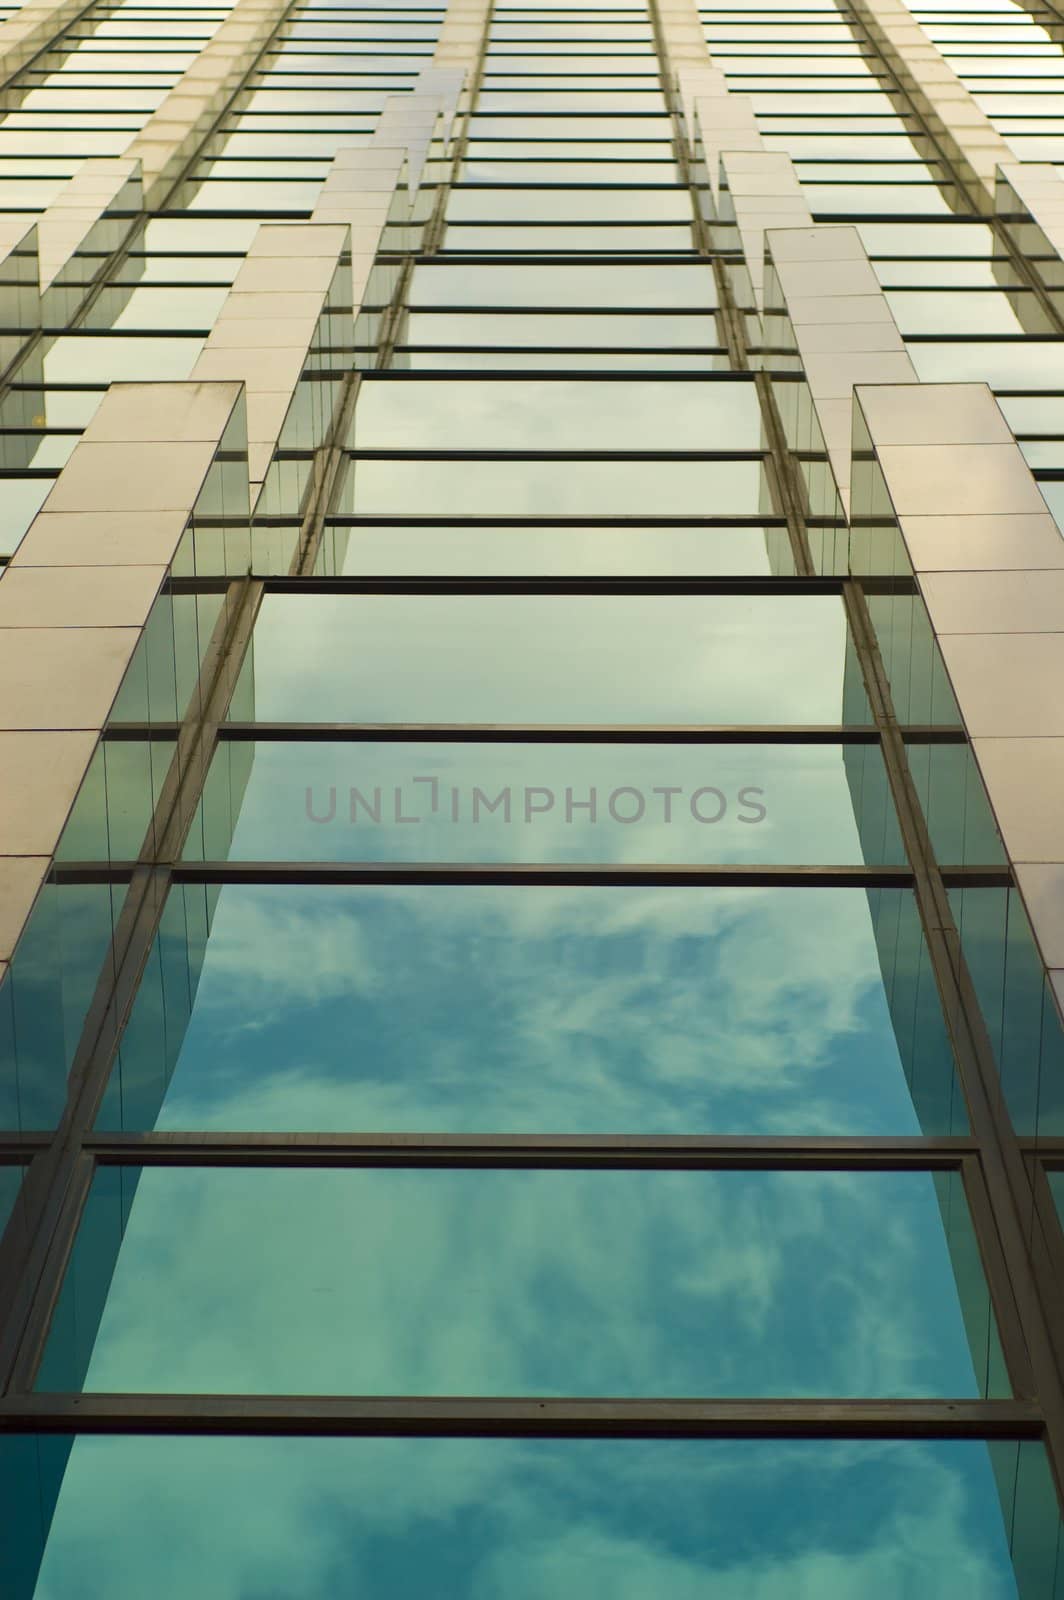 Reflection Of Sky In Windows Of Office Building.